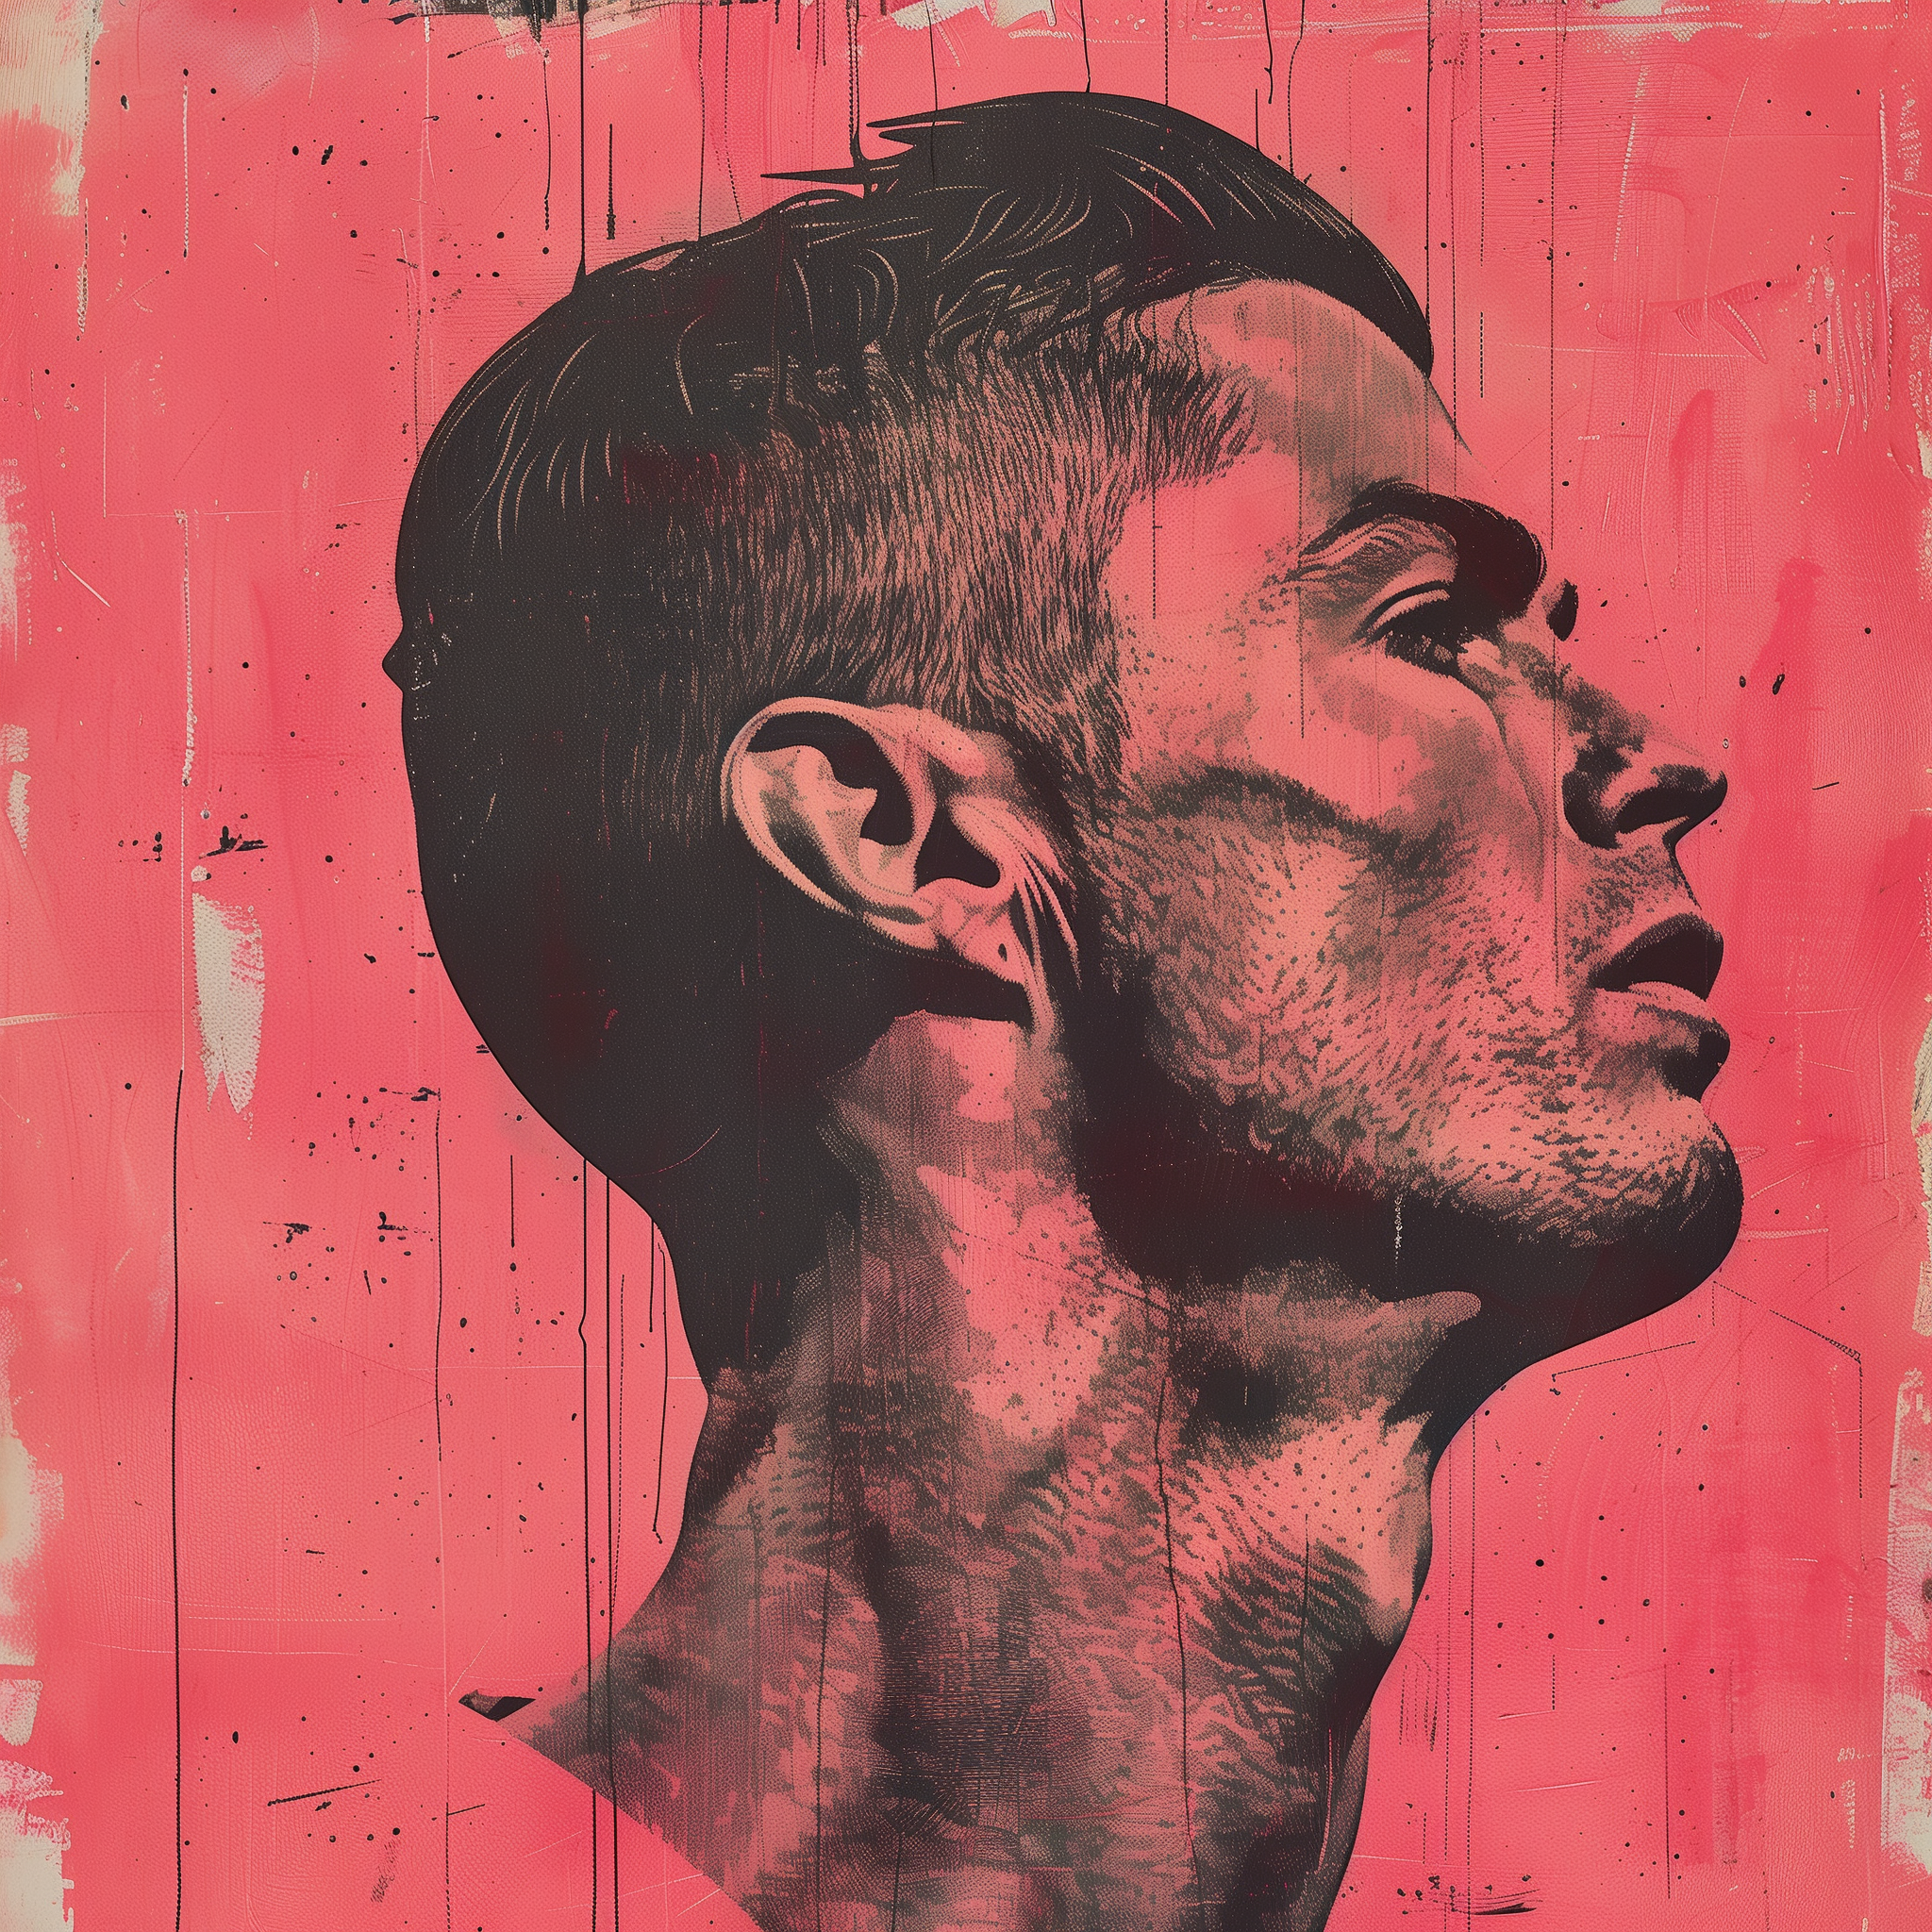 Stylized profile avatar of a male soccer player against a red textured background, inspired by a popular athlete.